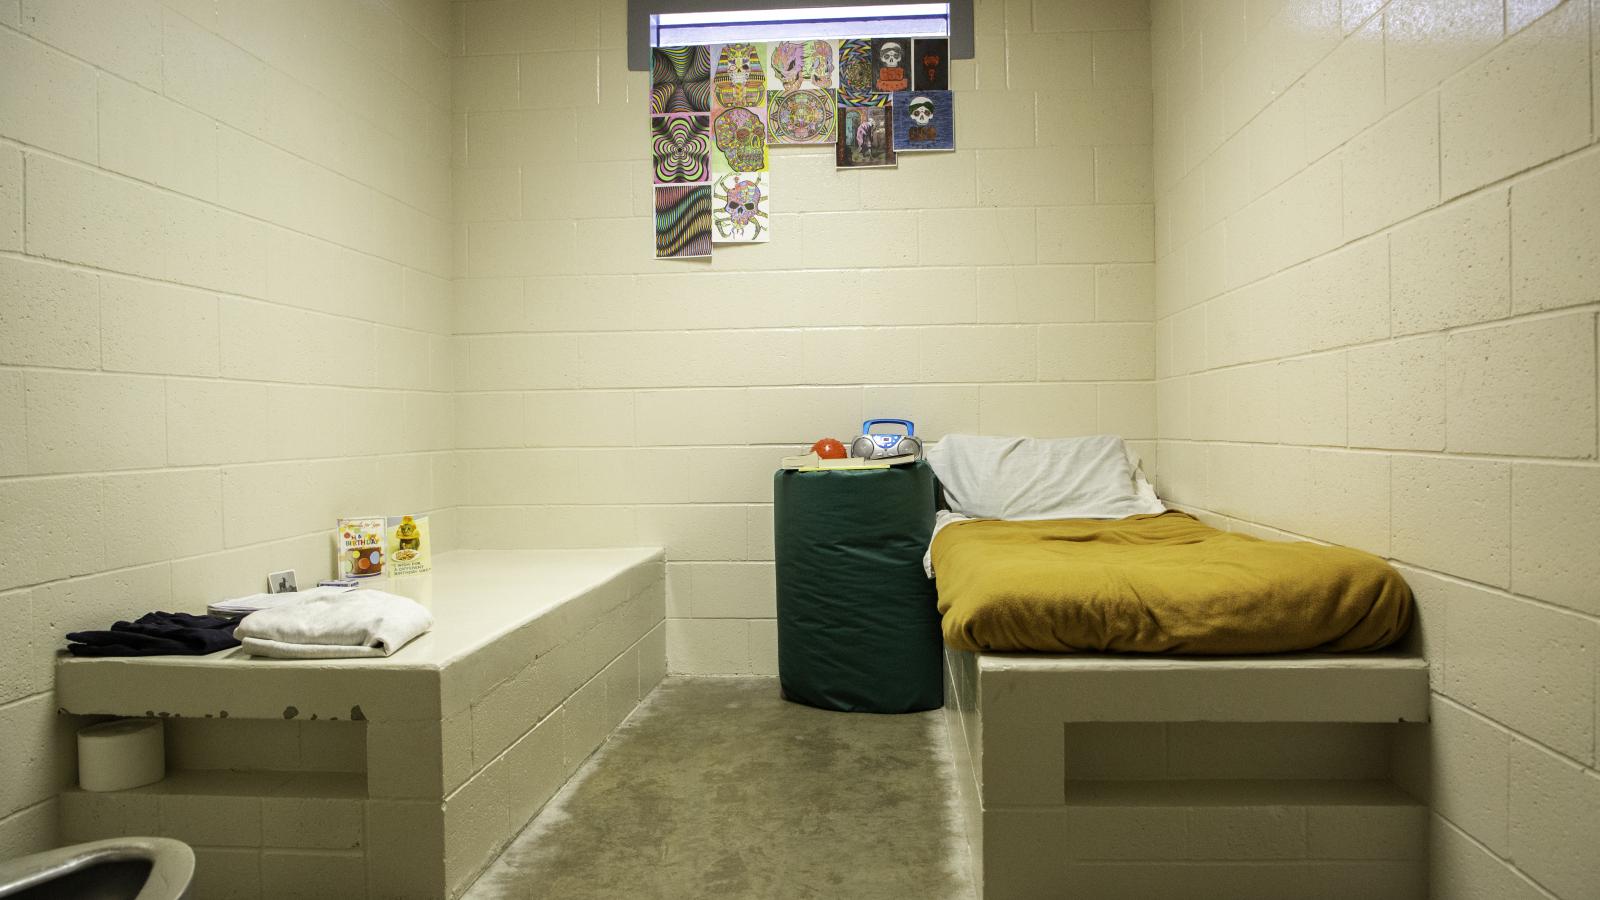 Interior view of a juvenile detention facility room with a bed and small window